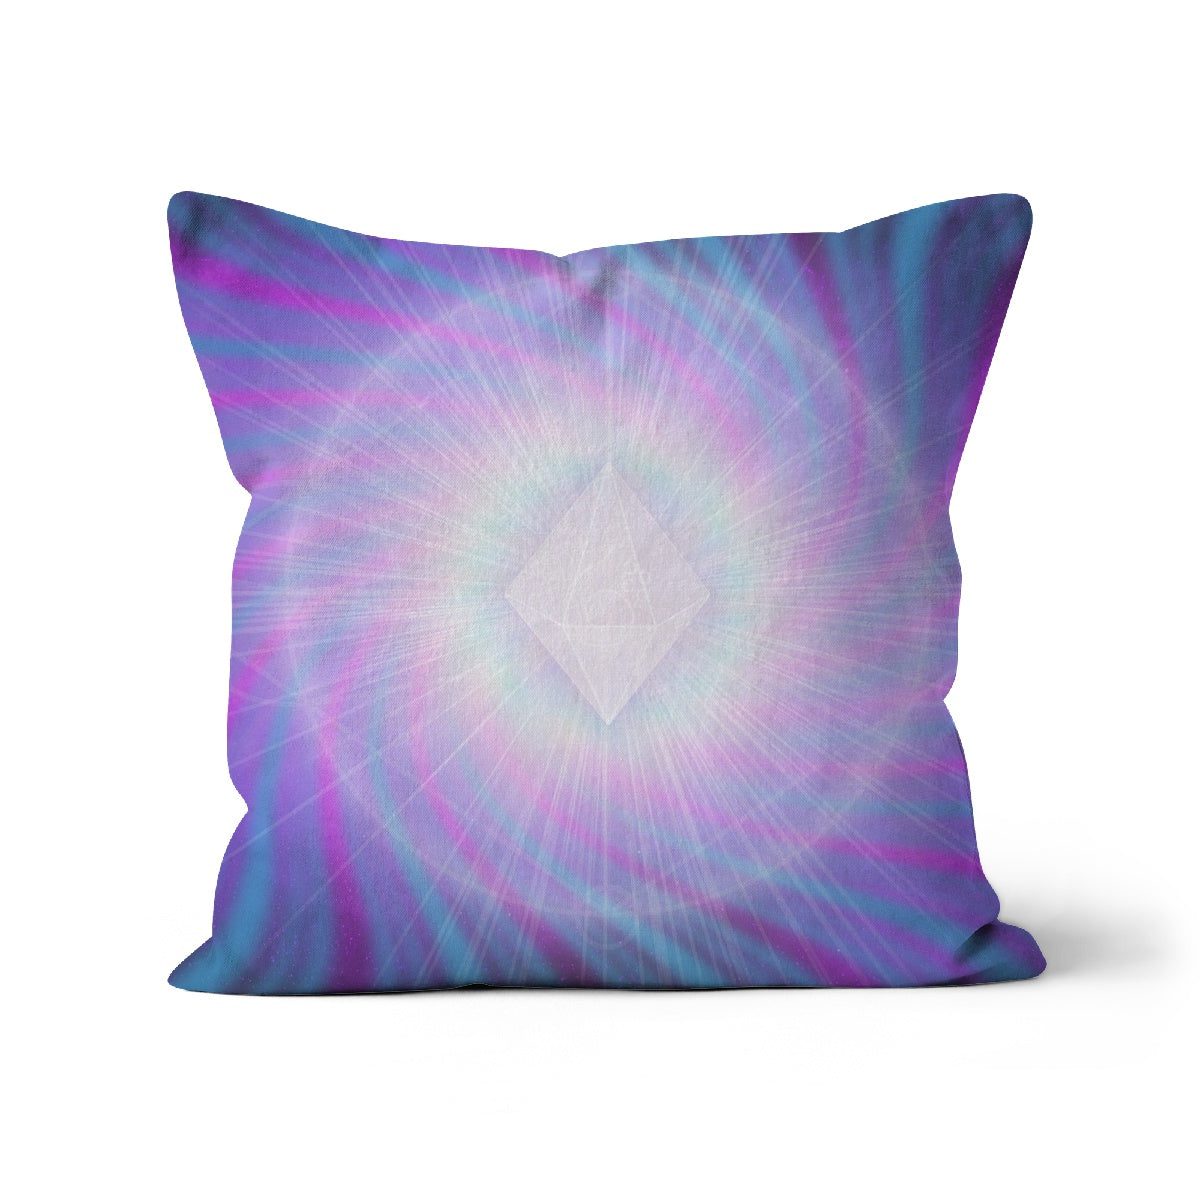 Violet Flame of the One True Heart – Cushion